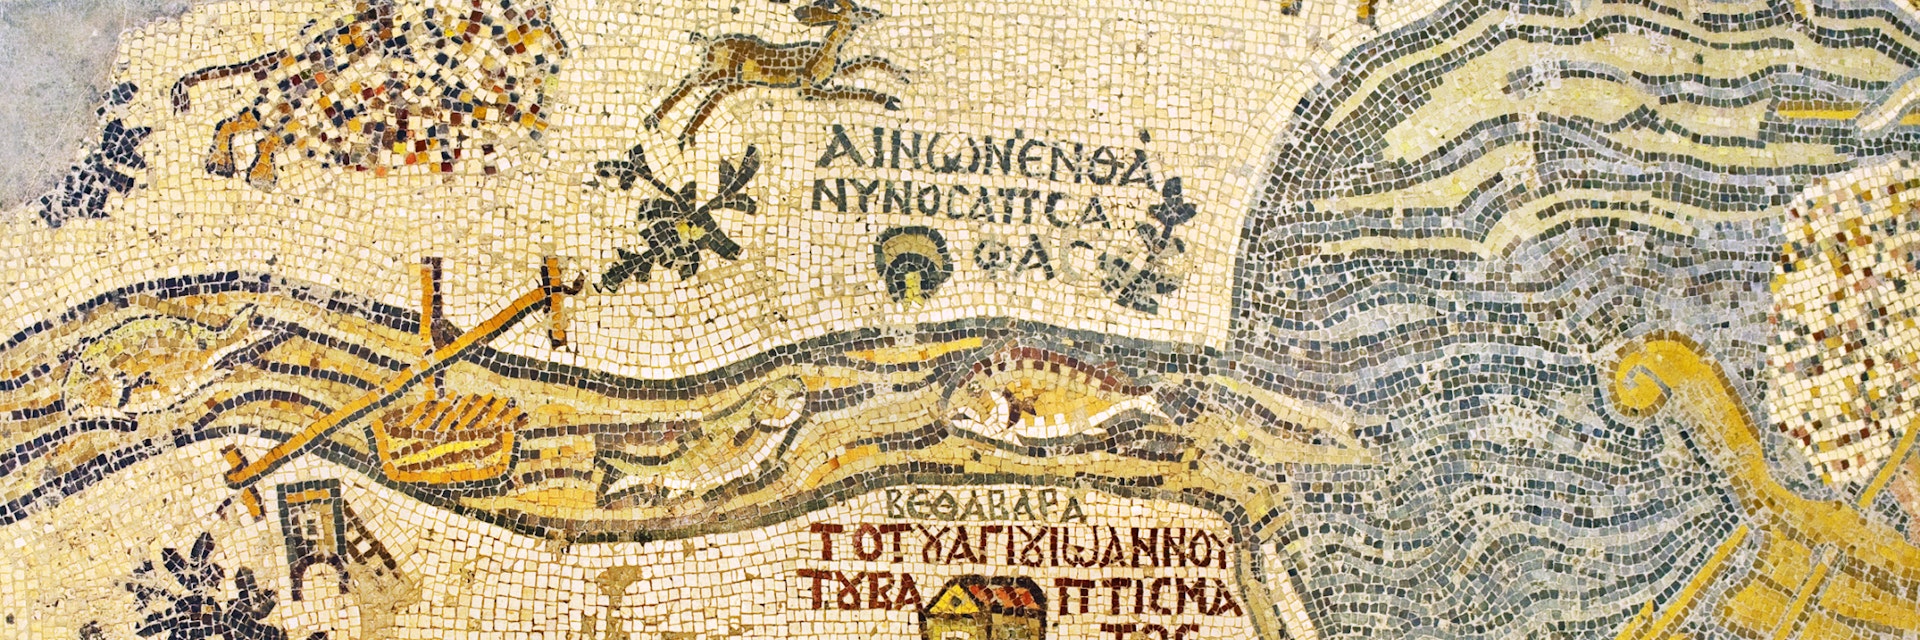 Jordan. Madaba (biblical Medeba) - St. George's Church. Fragment of the oldest floor mosaic map of the Holy Land - the Jordan River and the Dead Sea; Shutterstock ID 34182559; Your name (First / Last): Lauren Keith; GL account no.: 65050; Netsuite department name: Online Editorial; Full Product or Project name including edition: Jordan Online Update